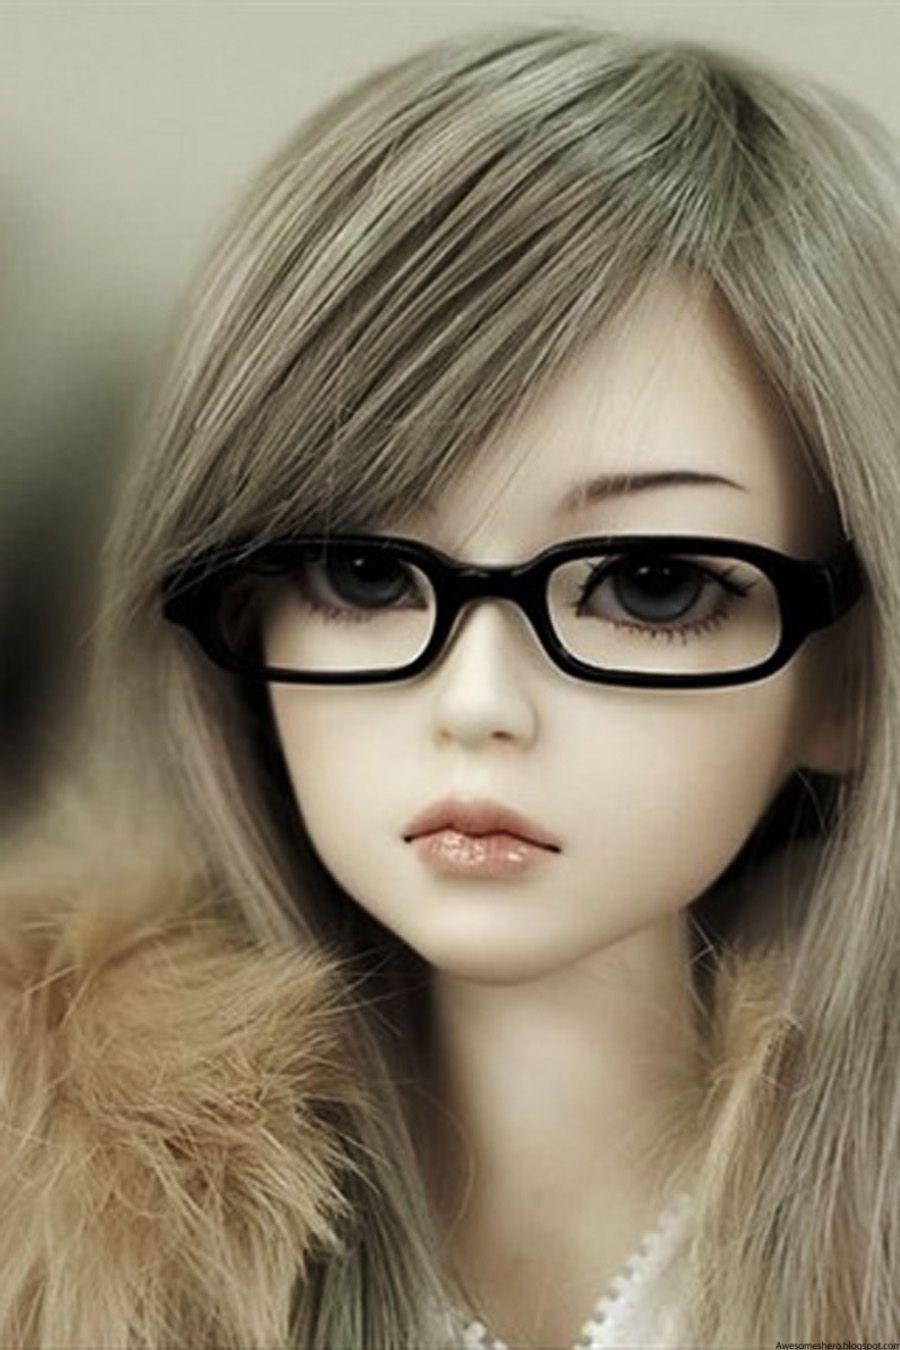 Barbie Doll Wallpaper For Mobile Free Download Barbie Doll